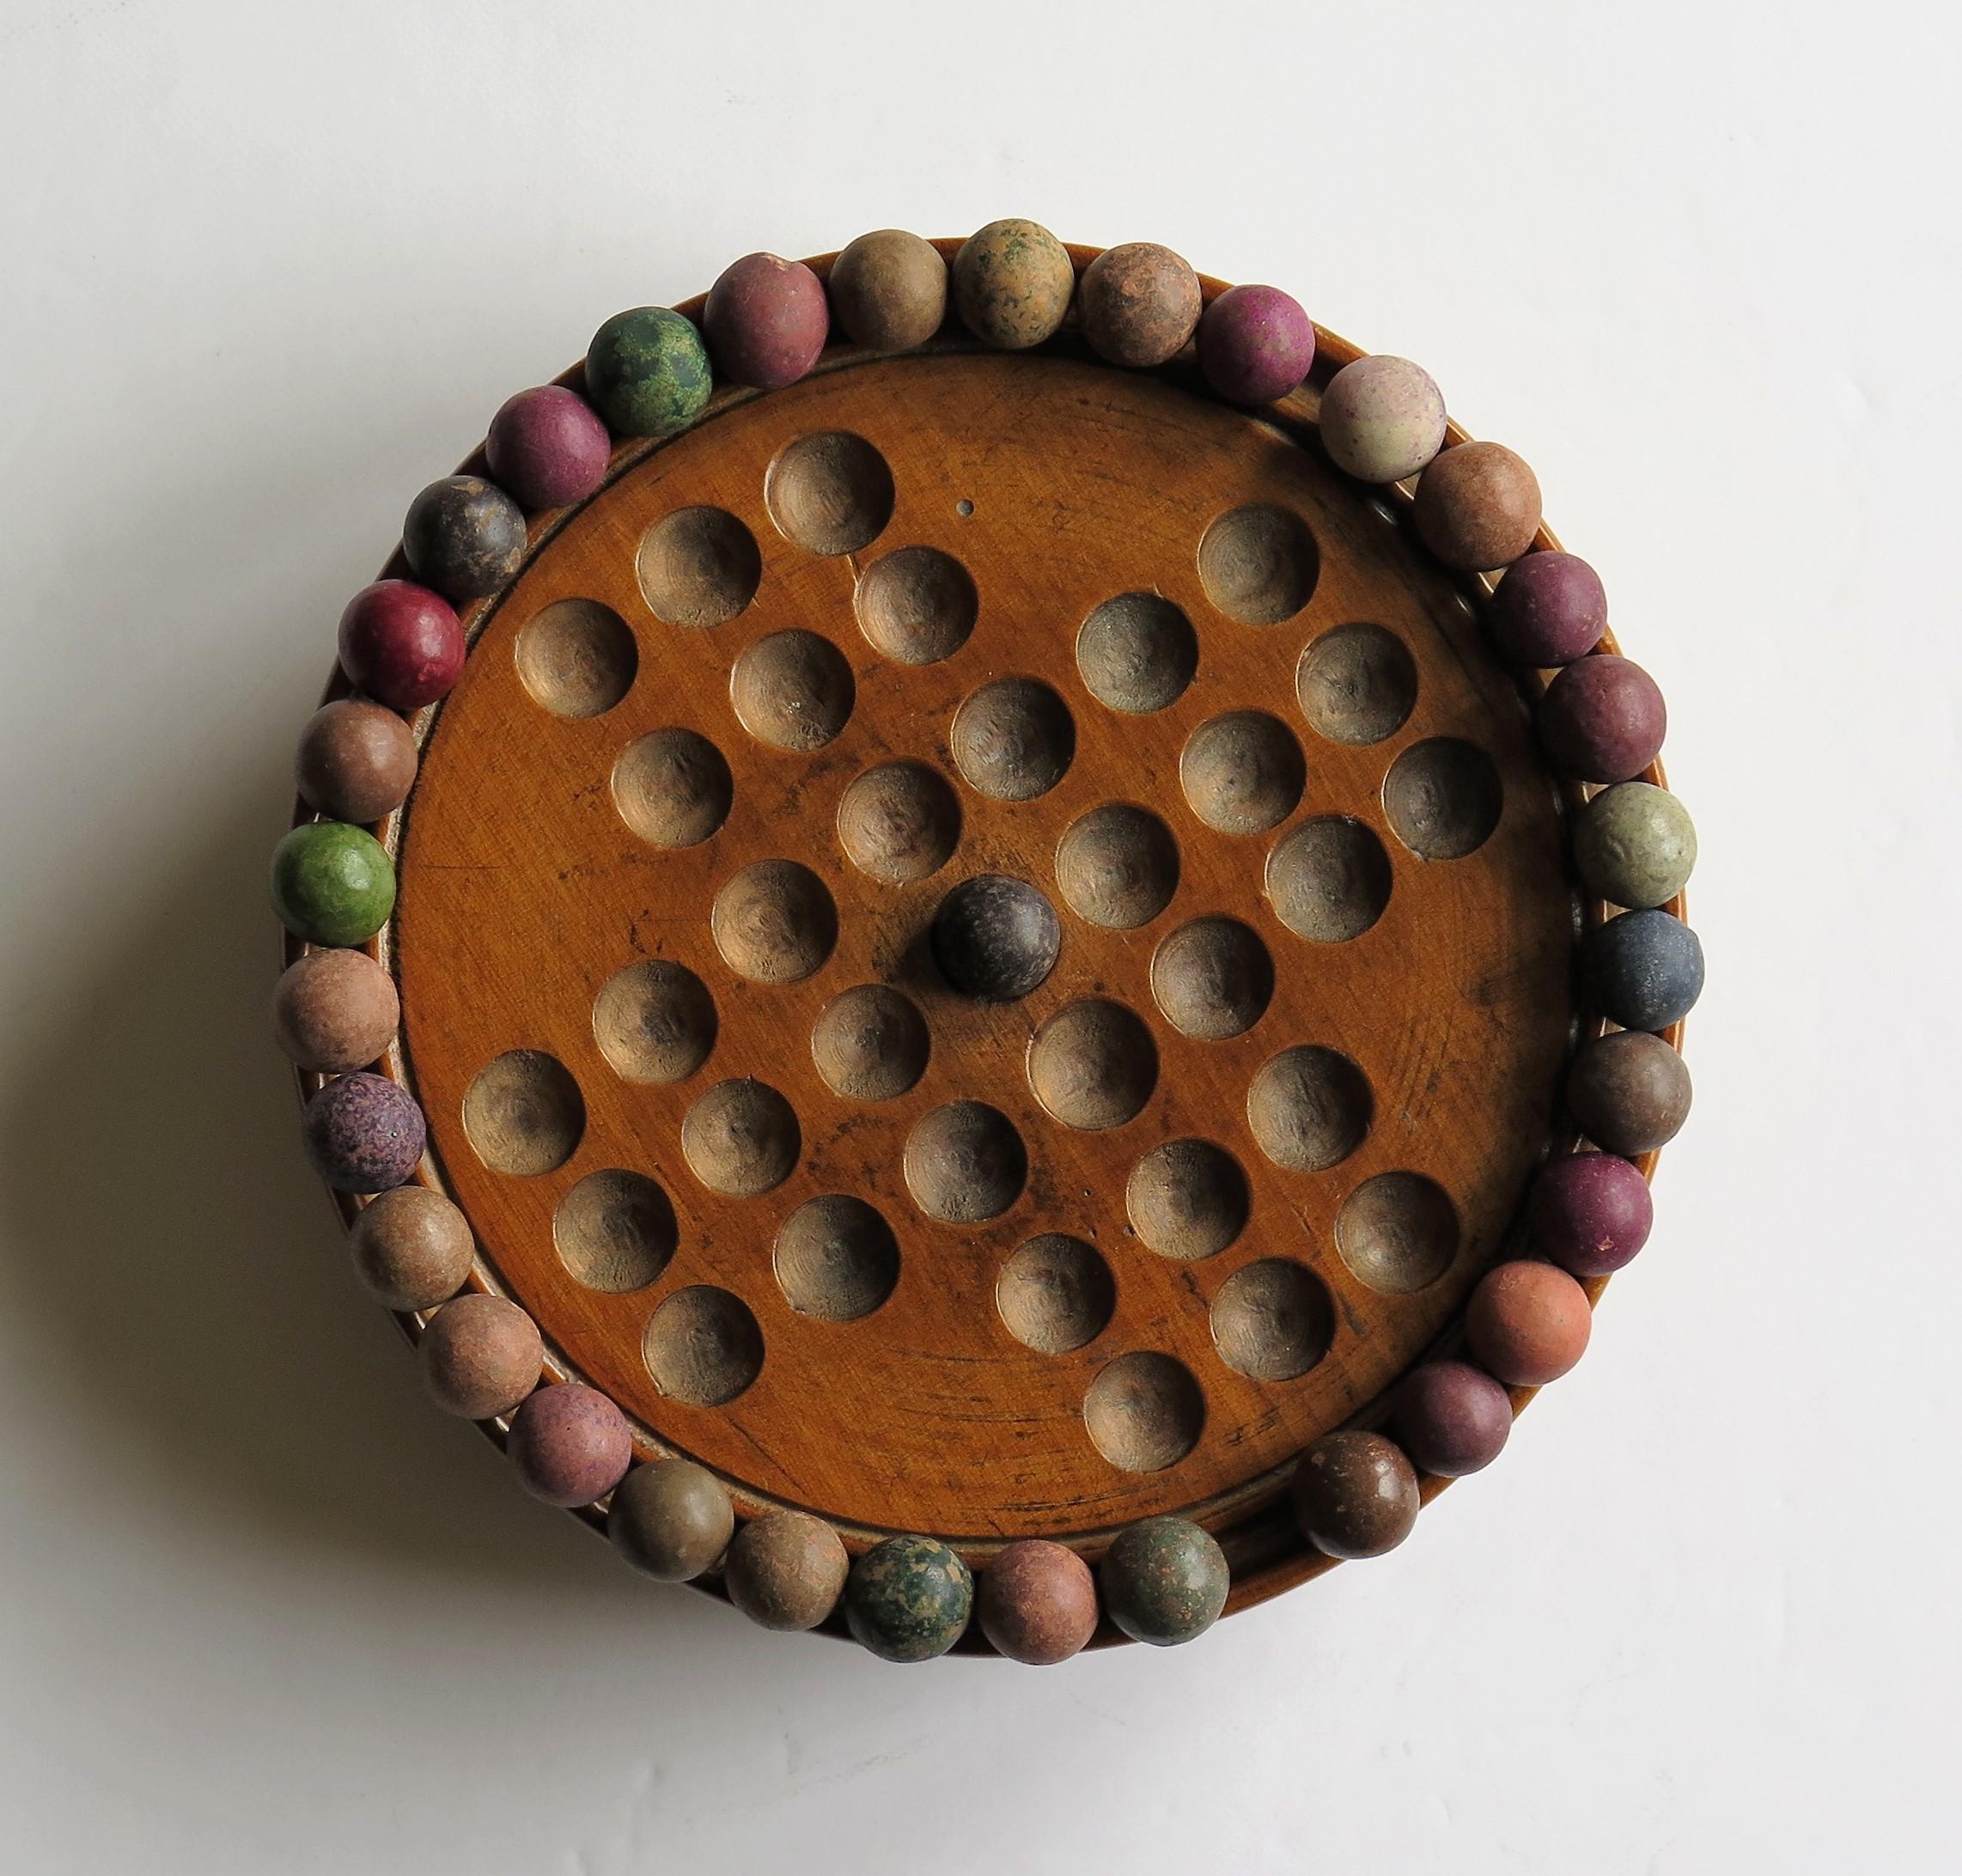 19th Century Travelling Marble Solitaire Game with 33 Handmade Clay Marbles 5